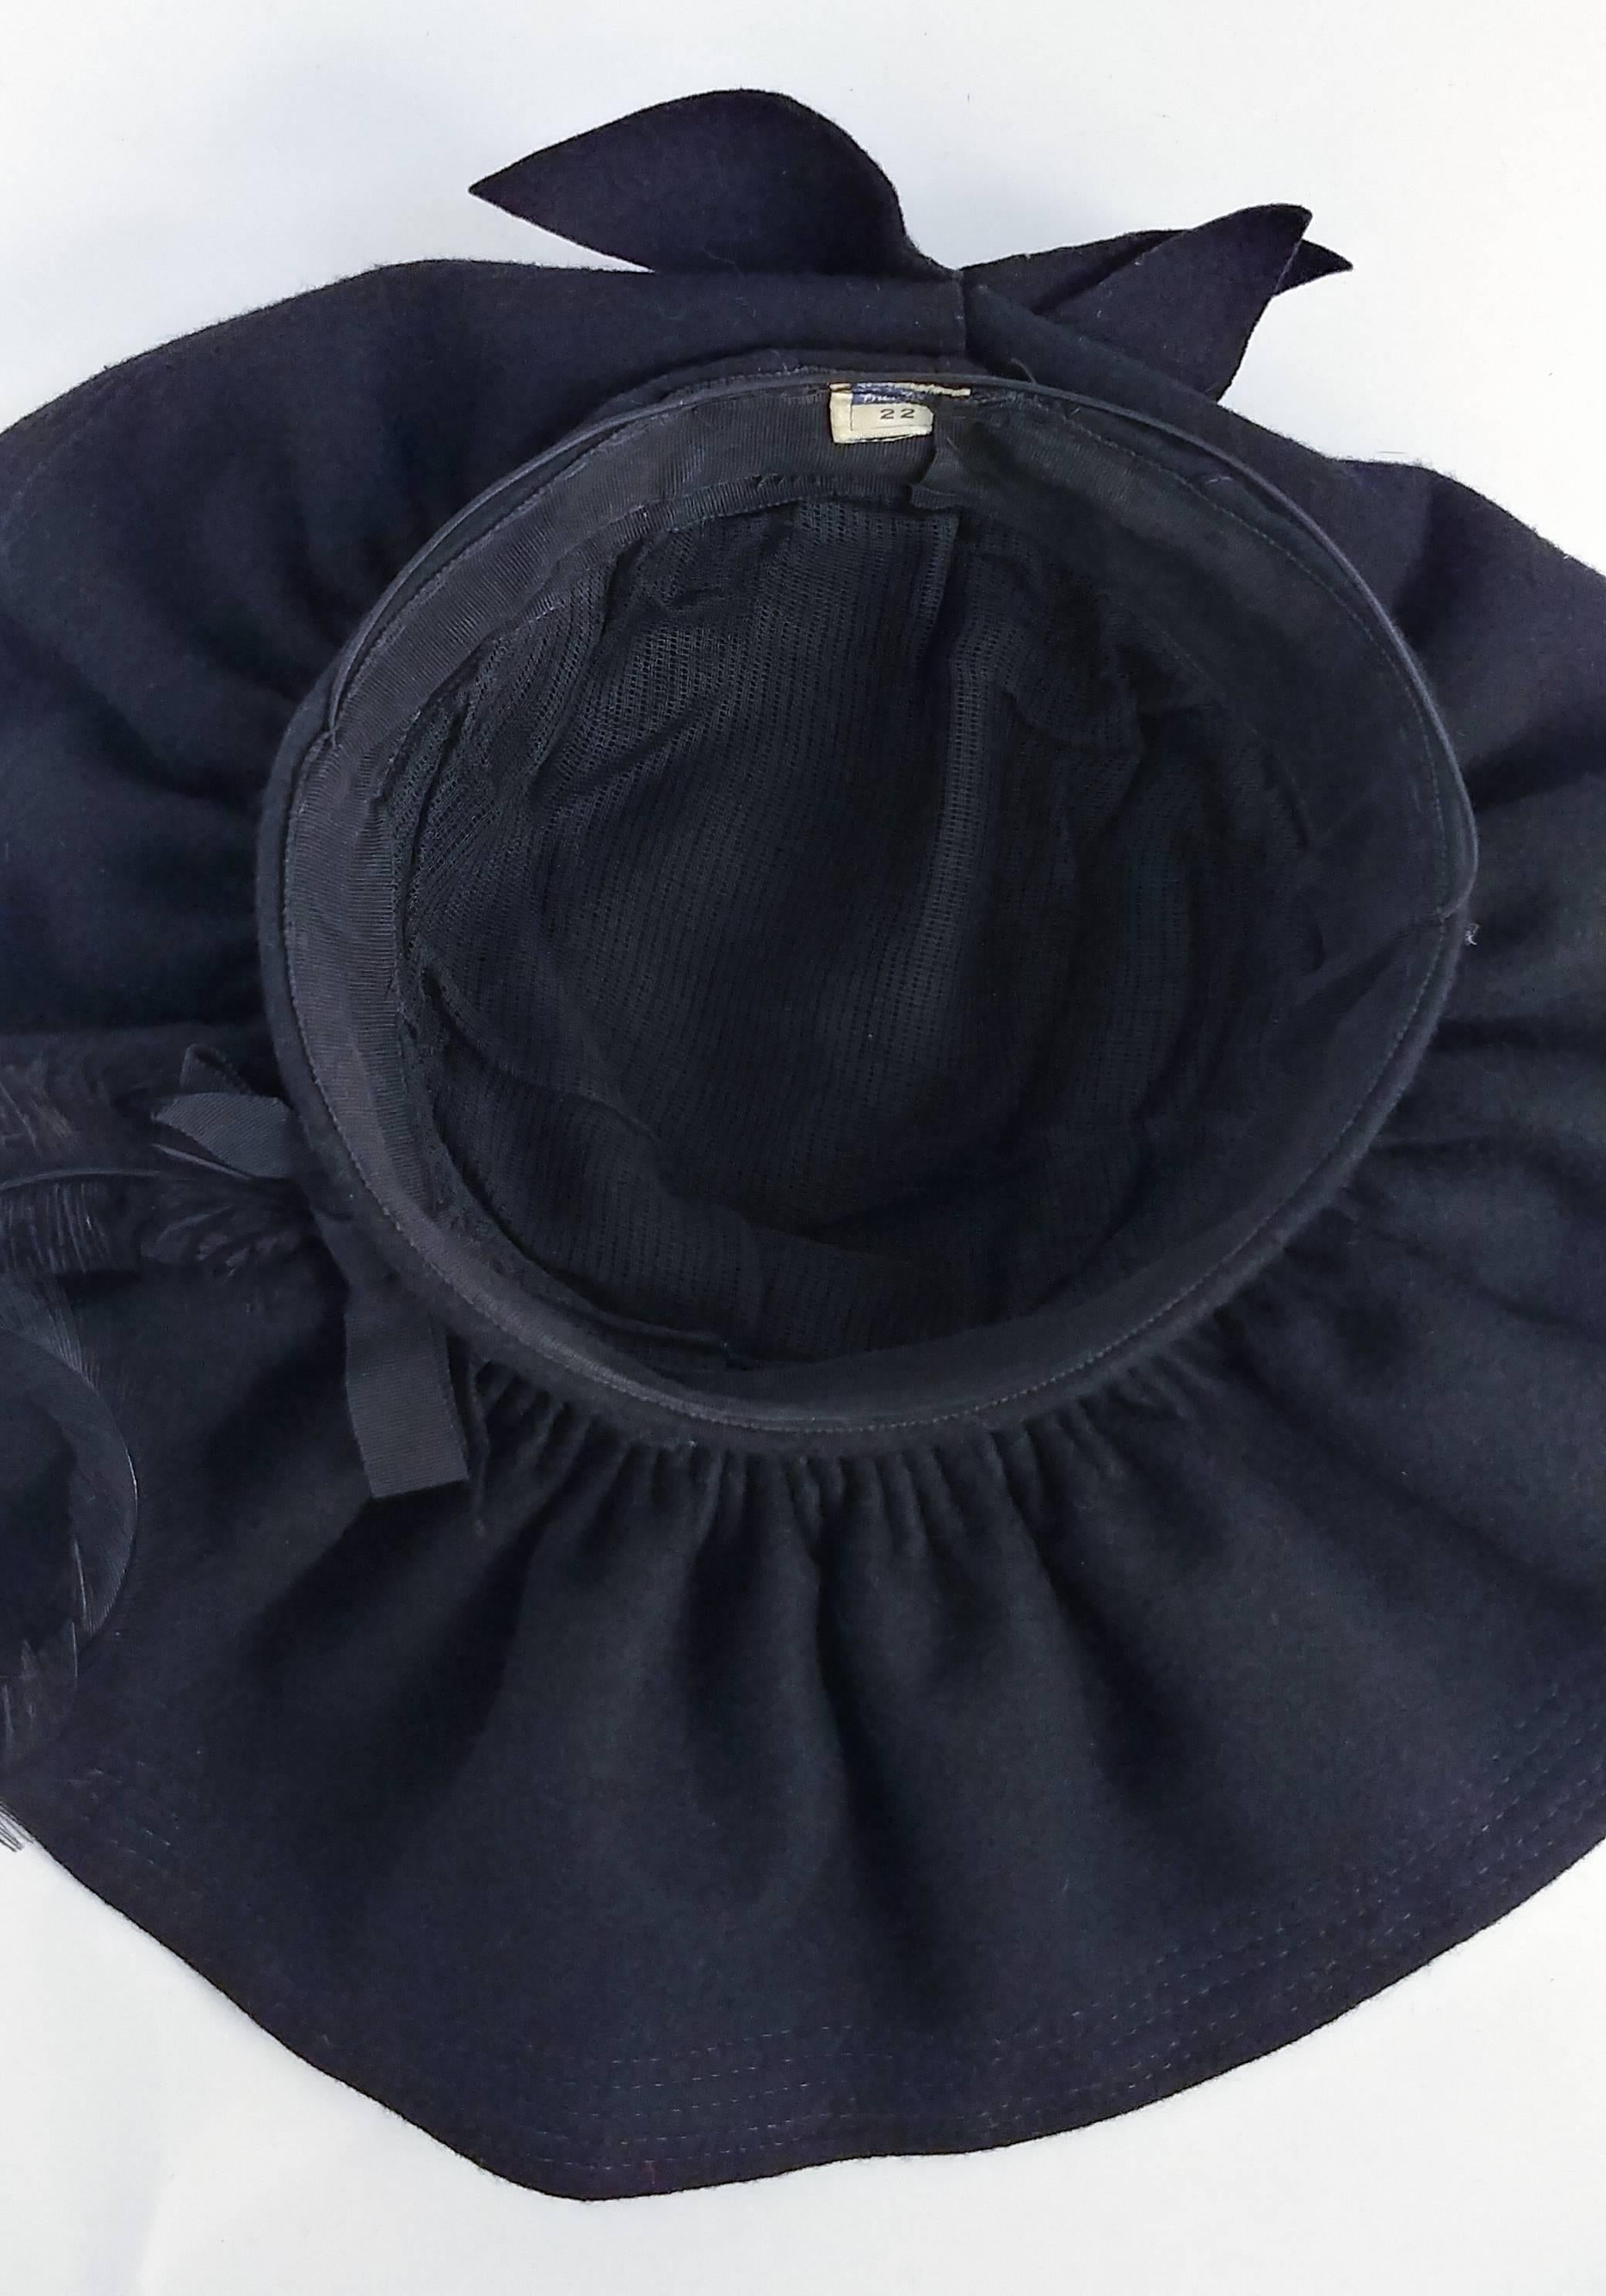 Women's 1940s Black Wool Ruffled Hat w/ Curled Feather